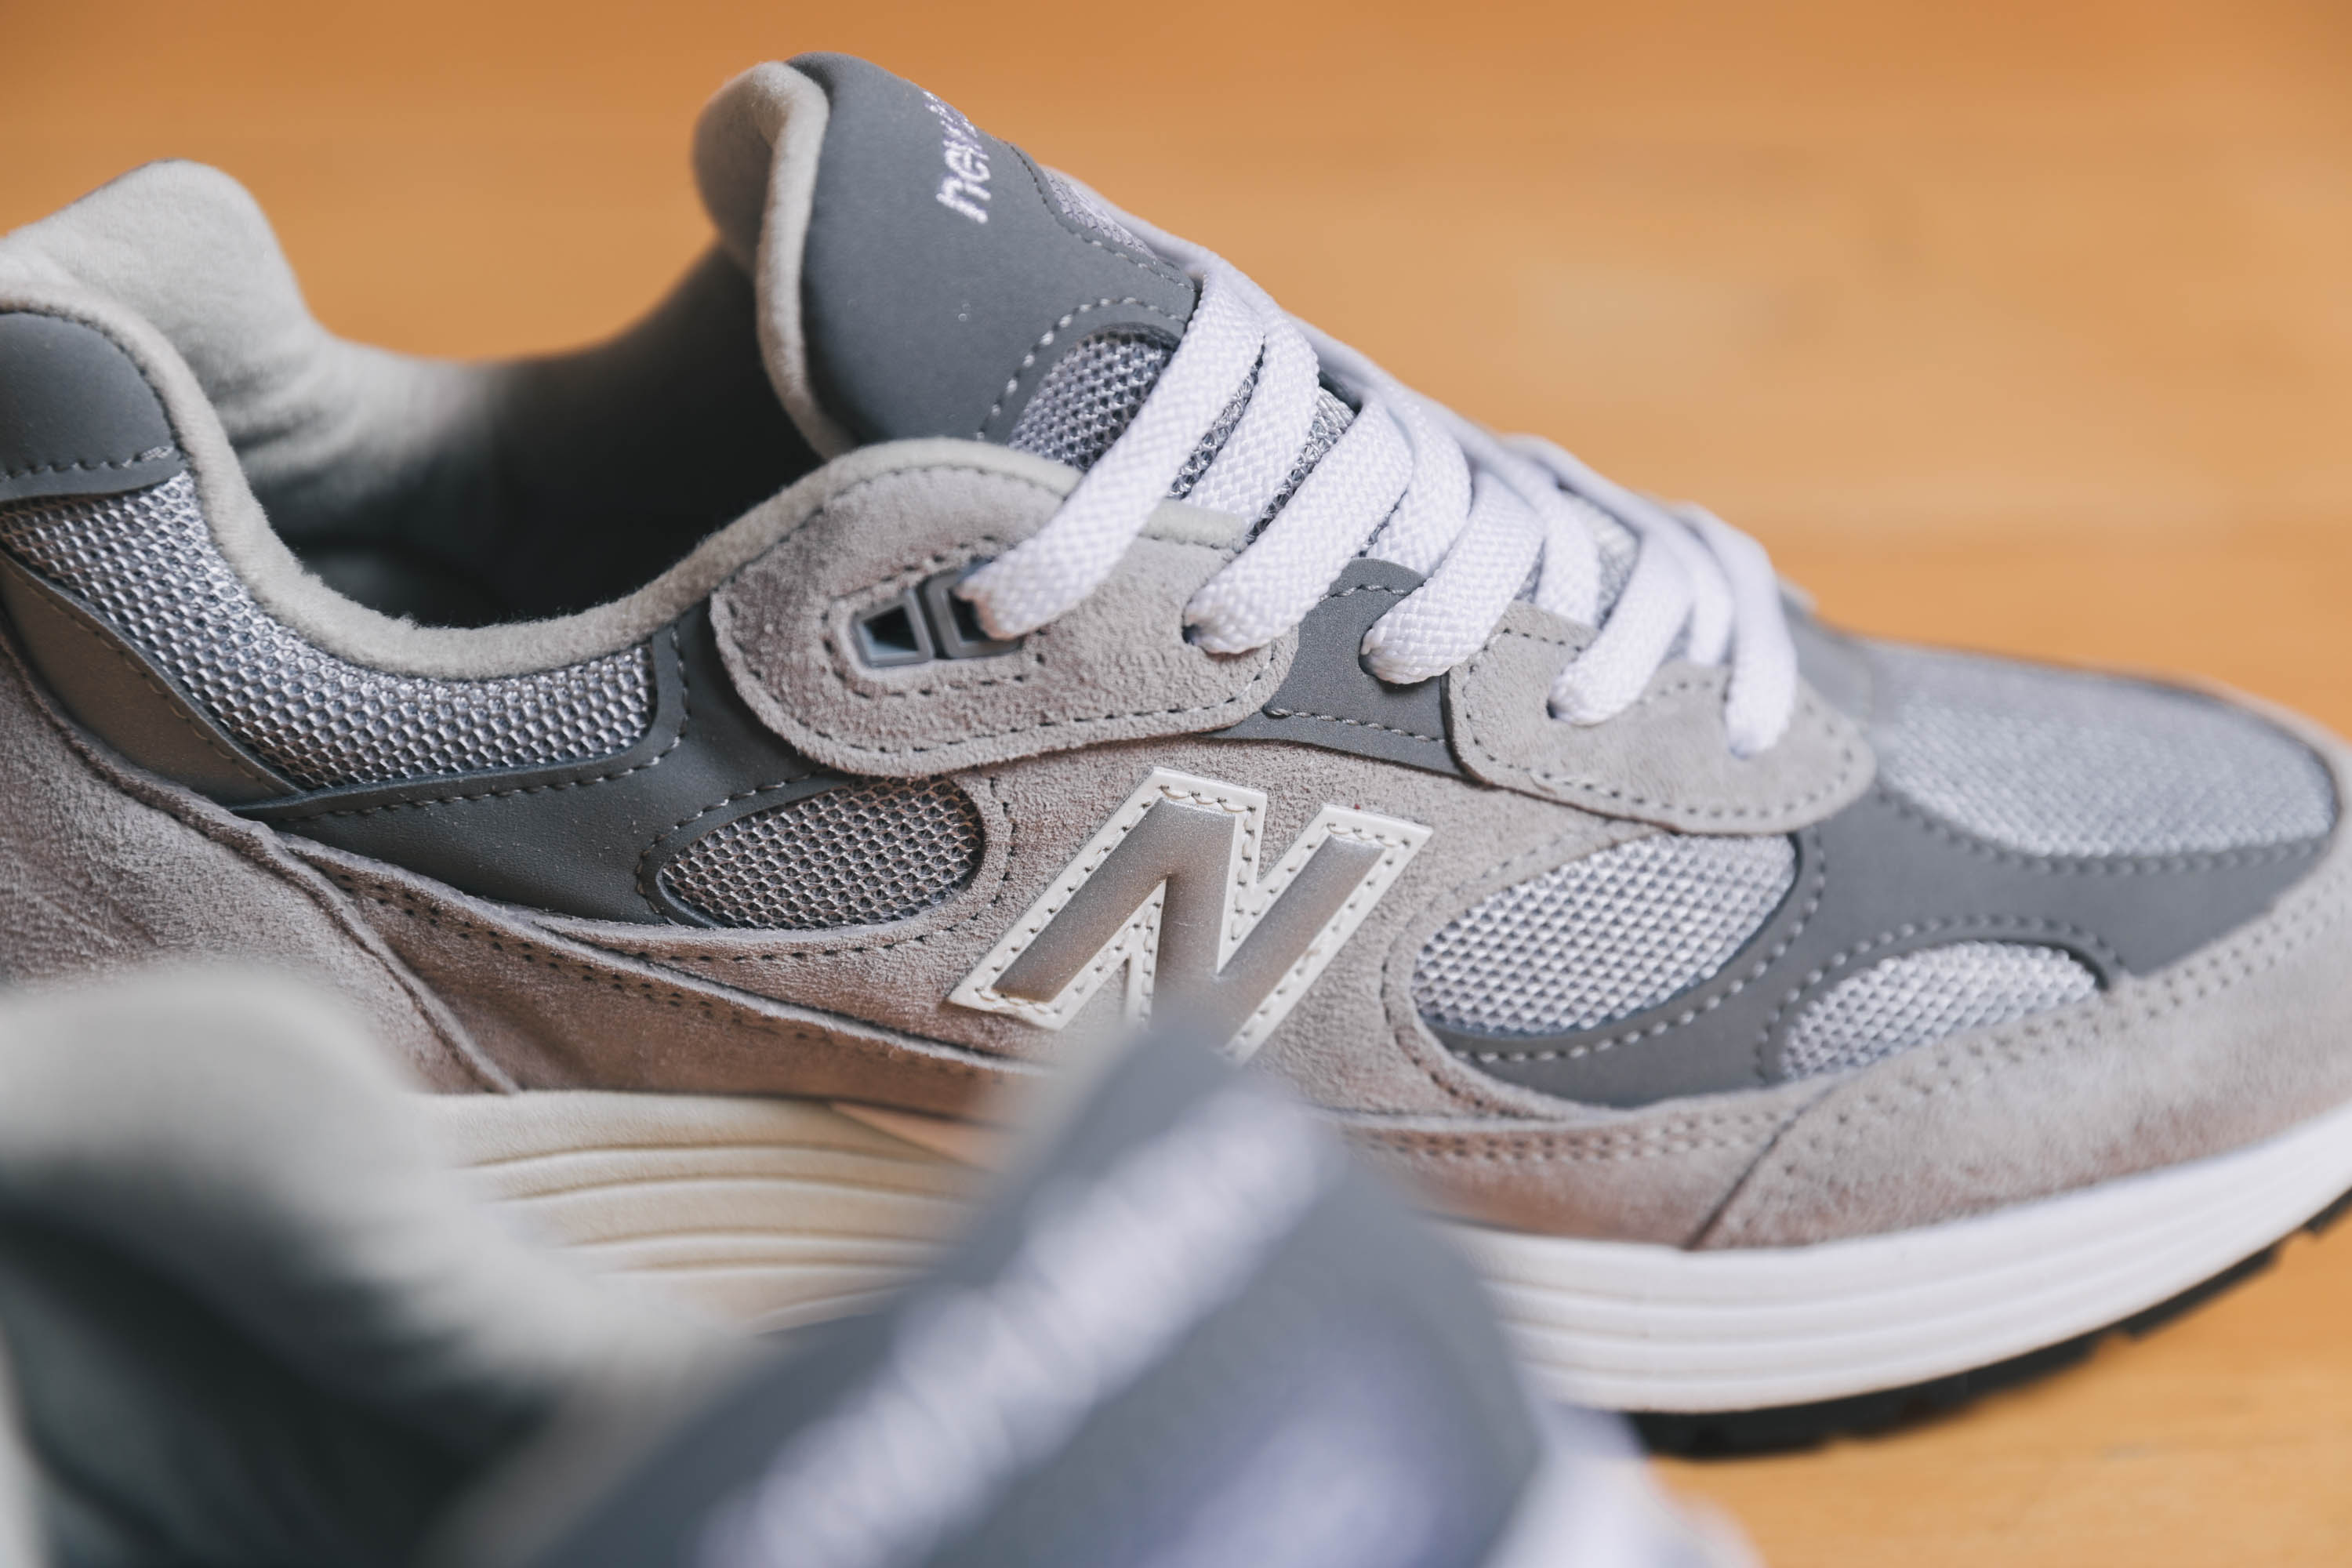 New Balance M992GR + M992BL | Up There